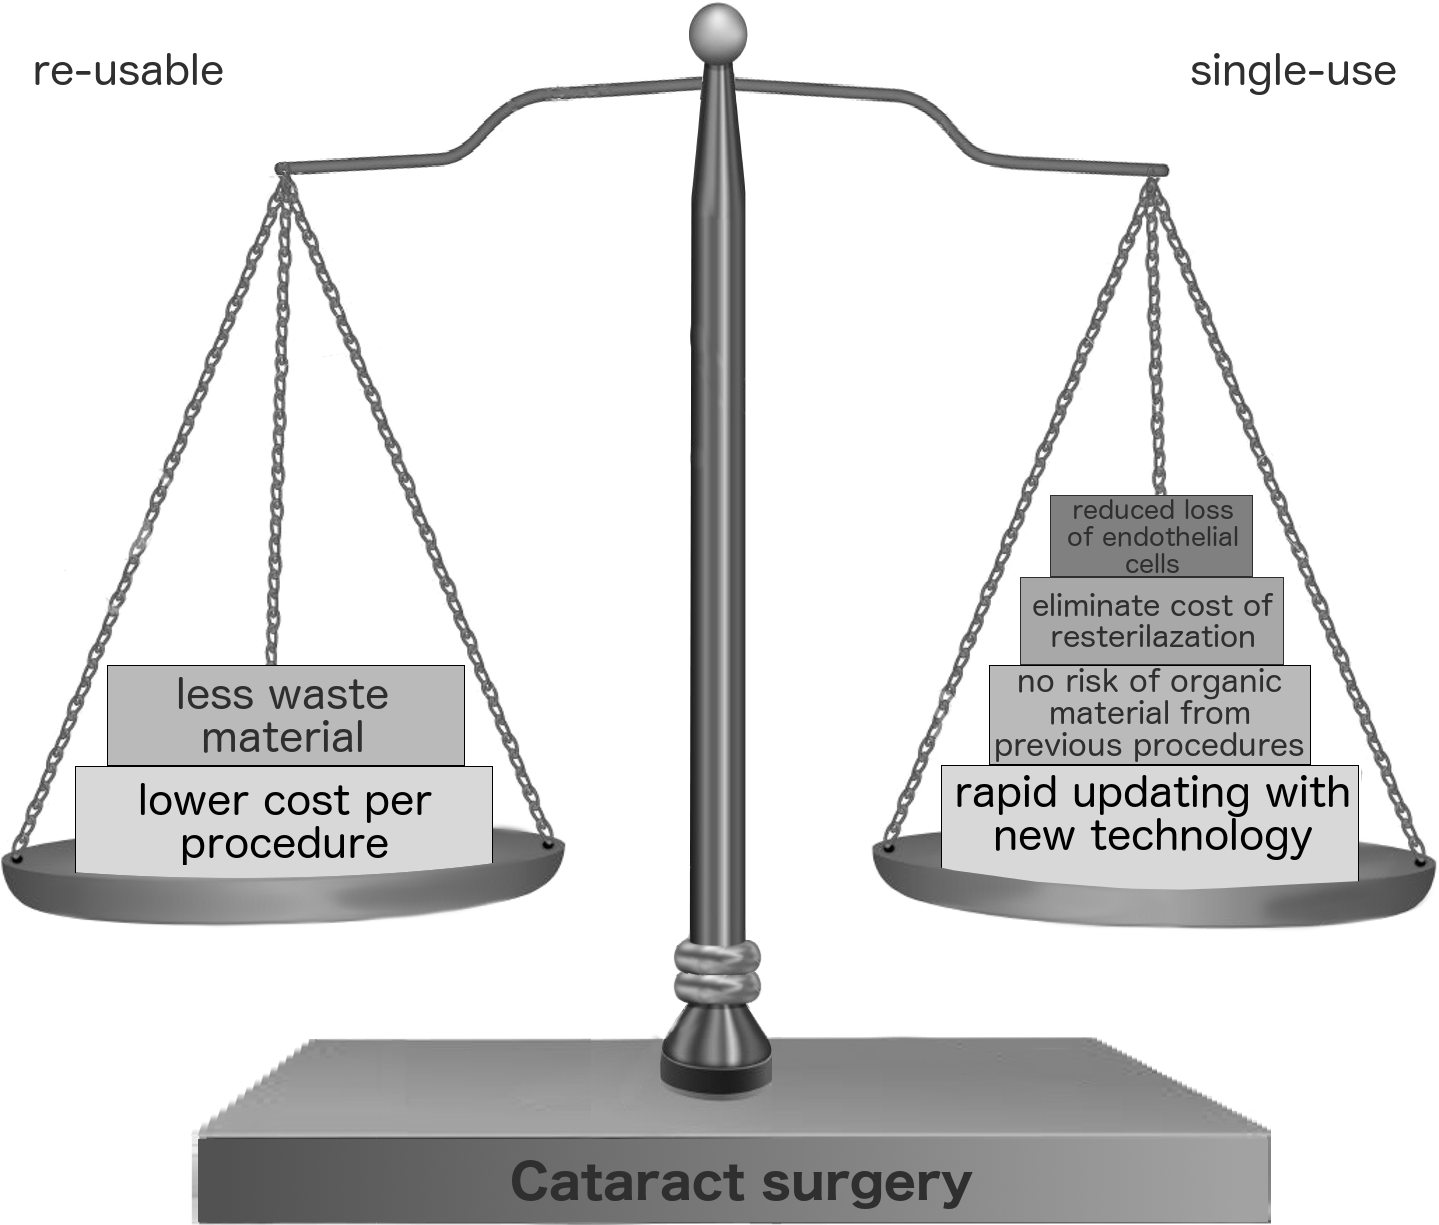 An illustration of the key advantages of reusable instruments vs all single-use instrument cataract surgery. Although I found that that balance was in favour of single-use, surgeons should decide for themselves, taking into consideration individual circumstances and patient outcomes.